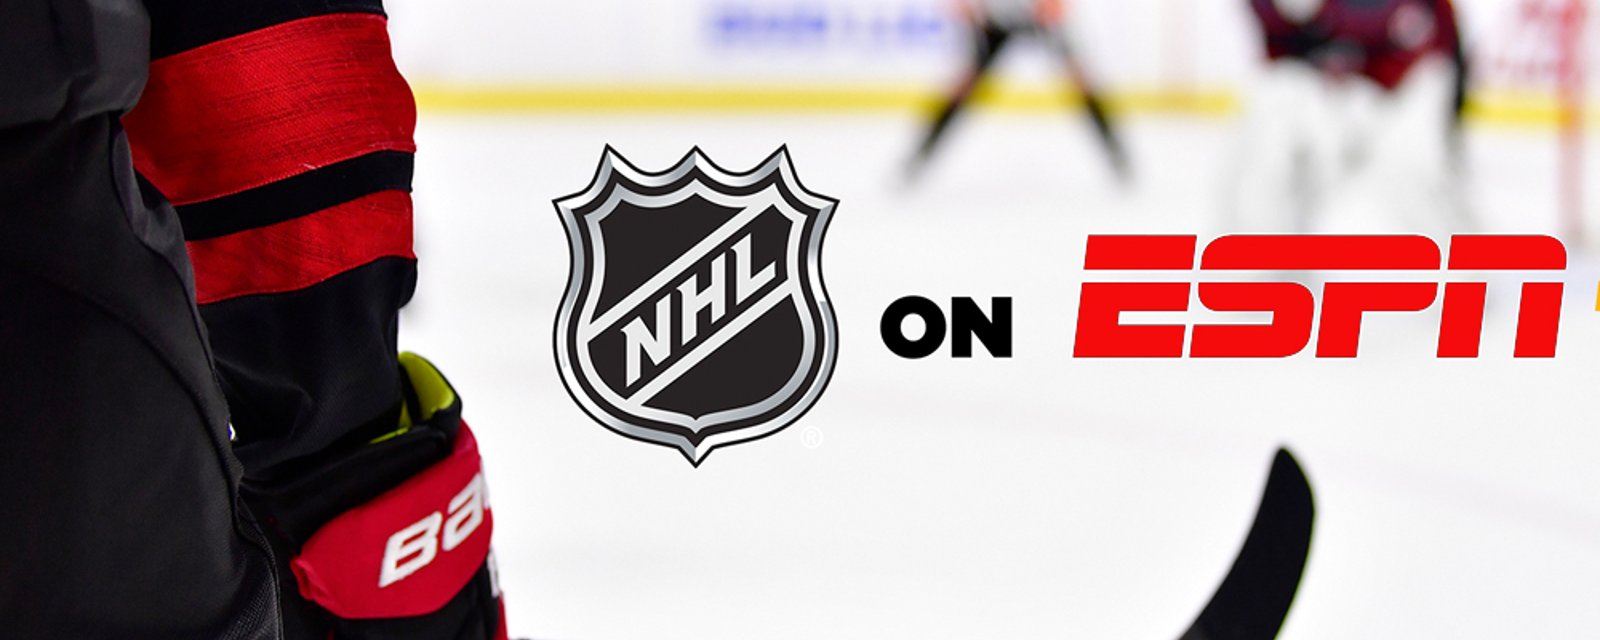 ESPN: “No one really cares about hockey… it’s not one of the 4 major sports”